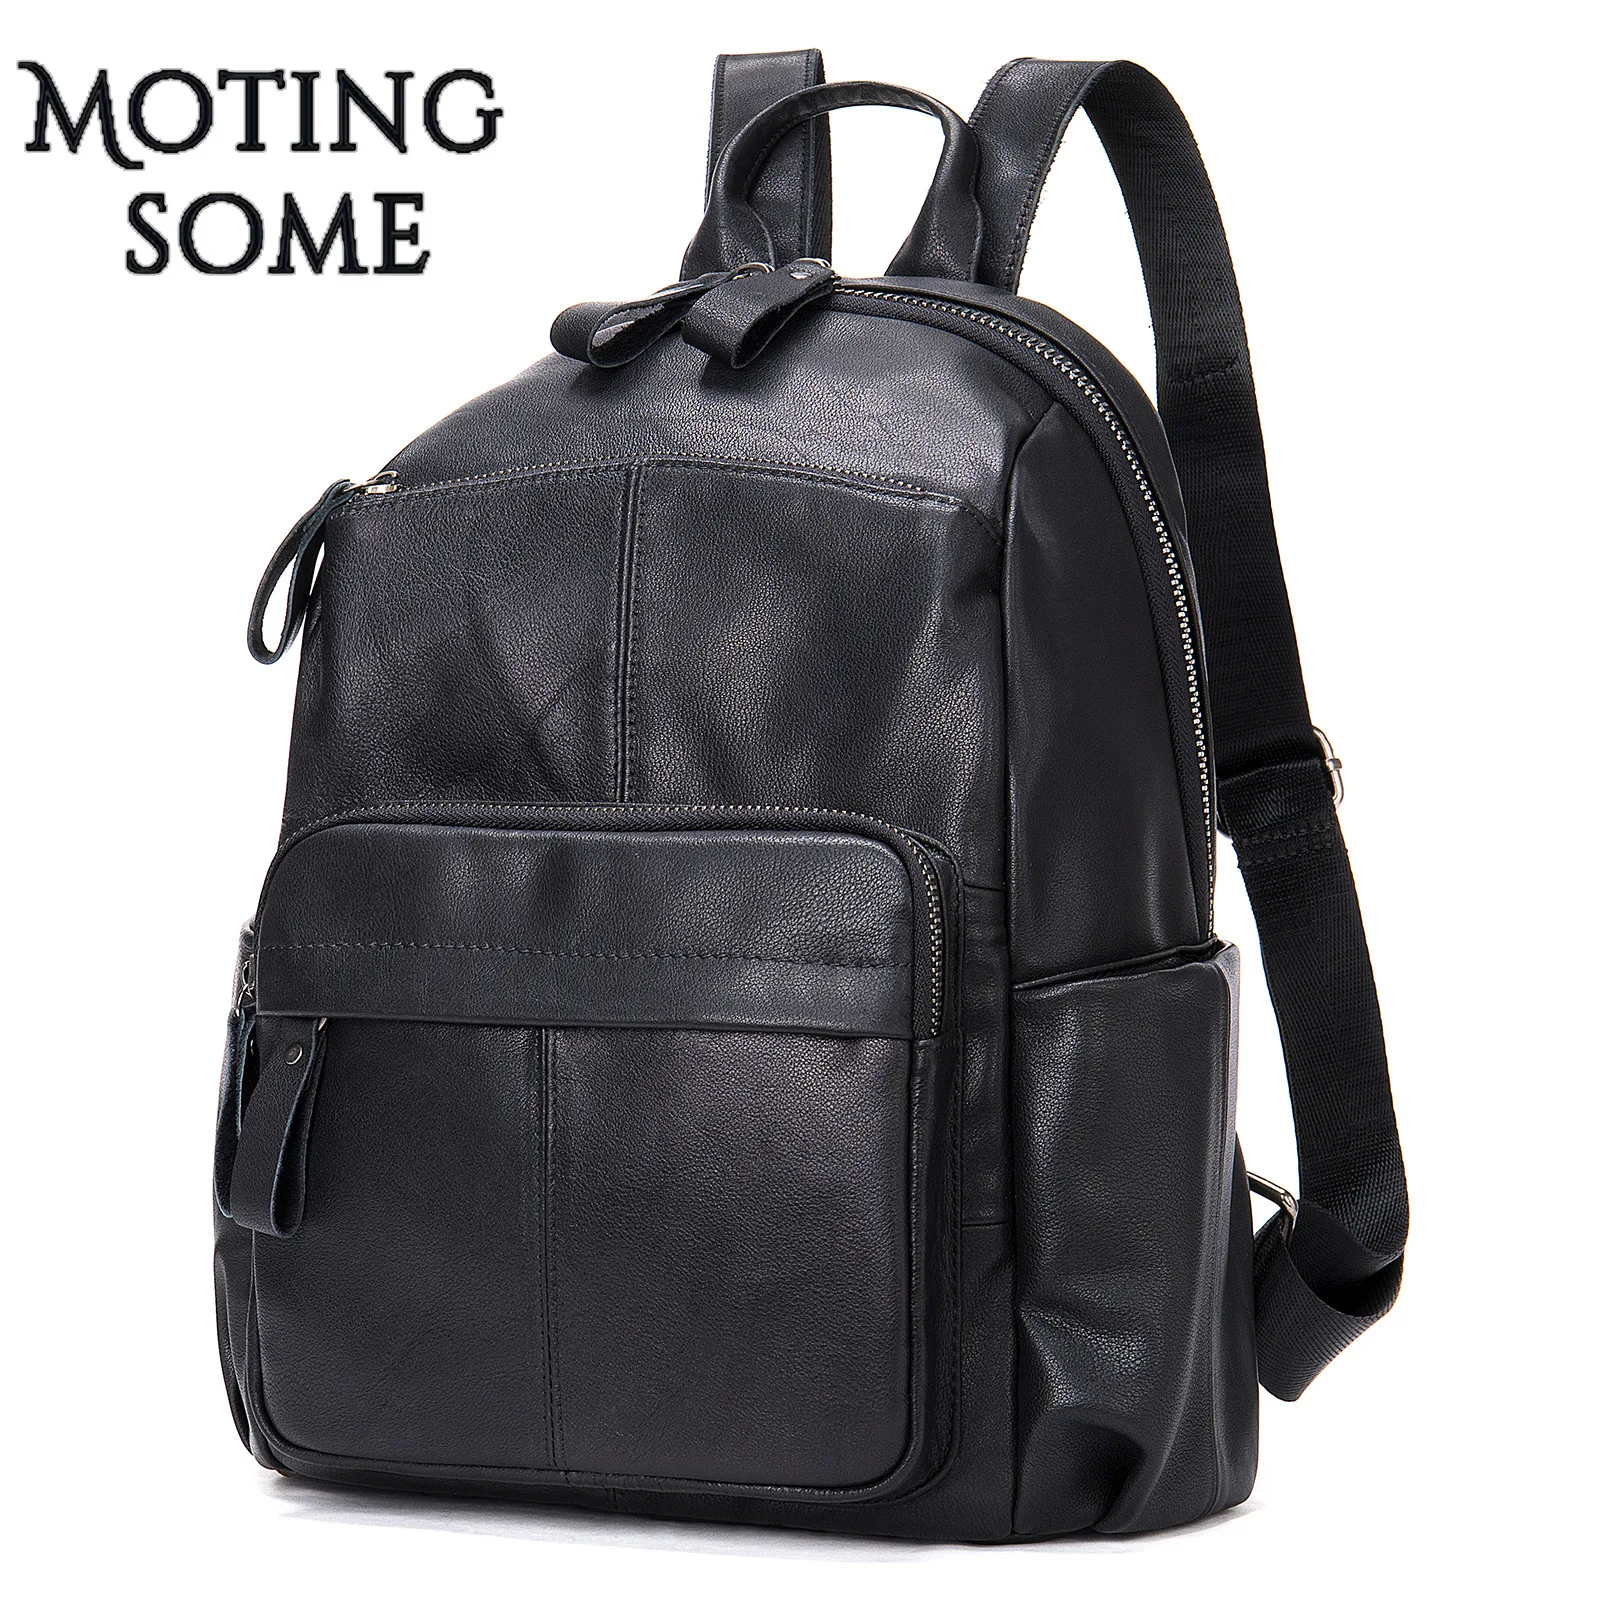 

Genuine Leather Backpack Women Anti-theft Design Bag Causal Simple Style 100% Cowhide Black School Bags for Girl Knapsack 2021